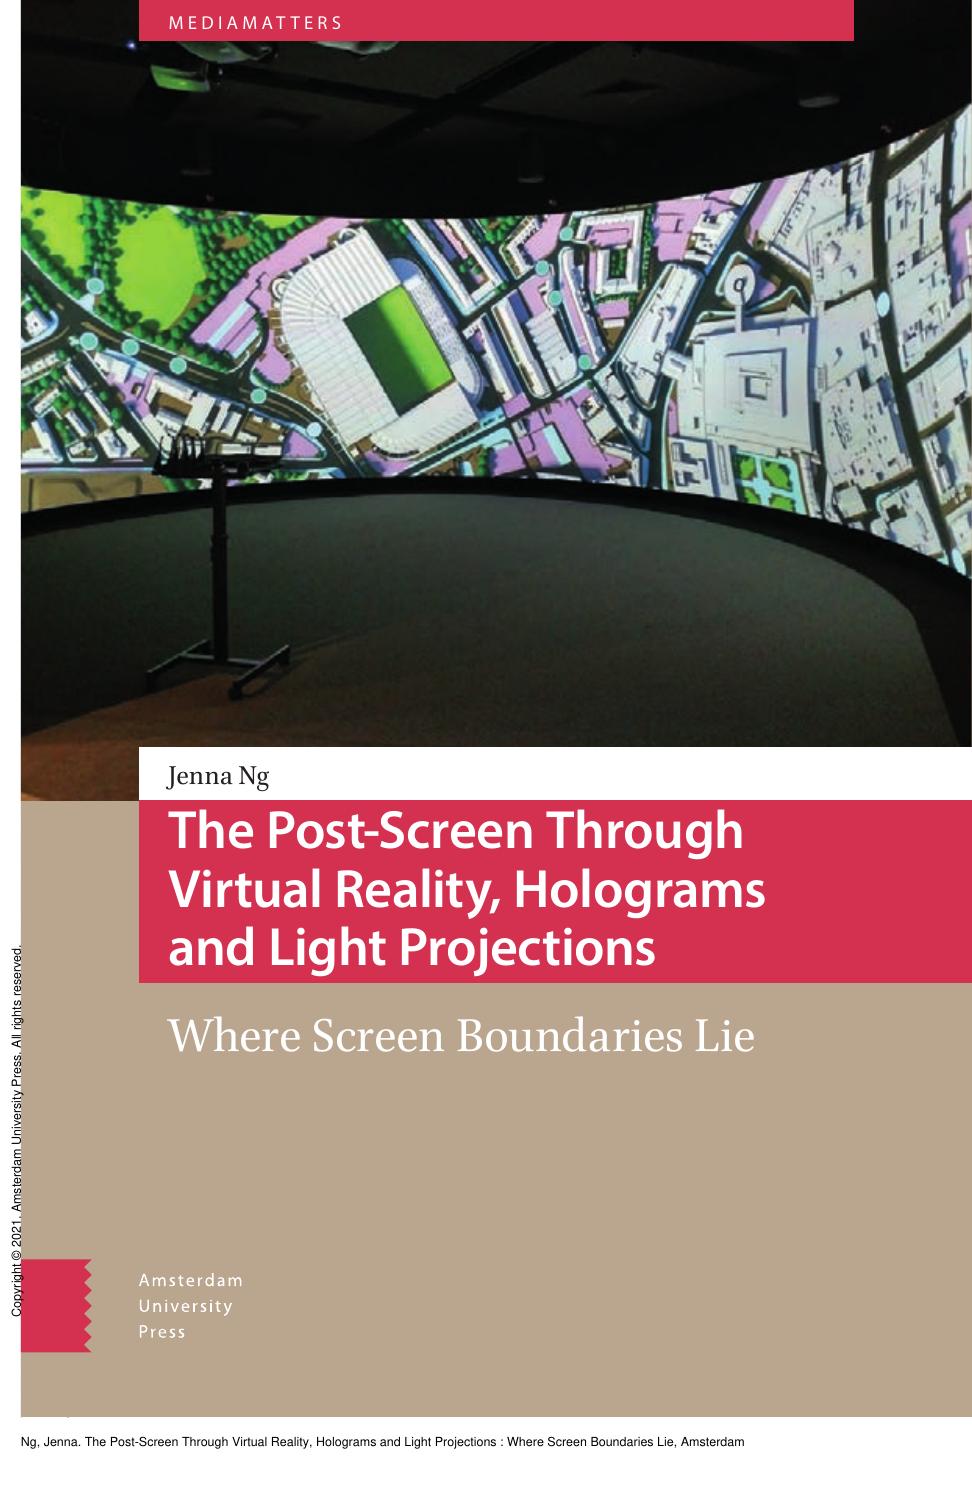 The Post-Screen Through Virtual Reality, Holograms and Light Projections : Where Screen Boundaries Lie by Jenna Ng